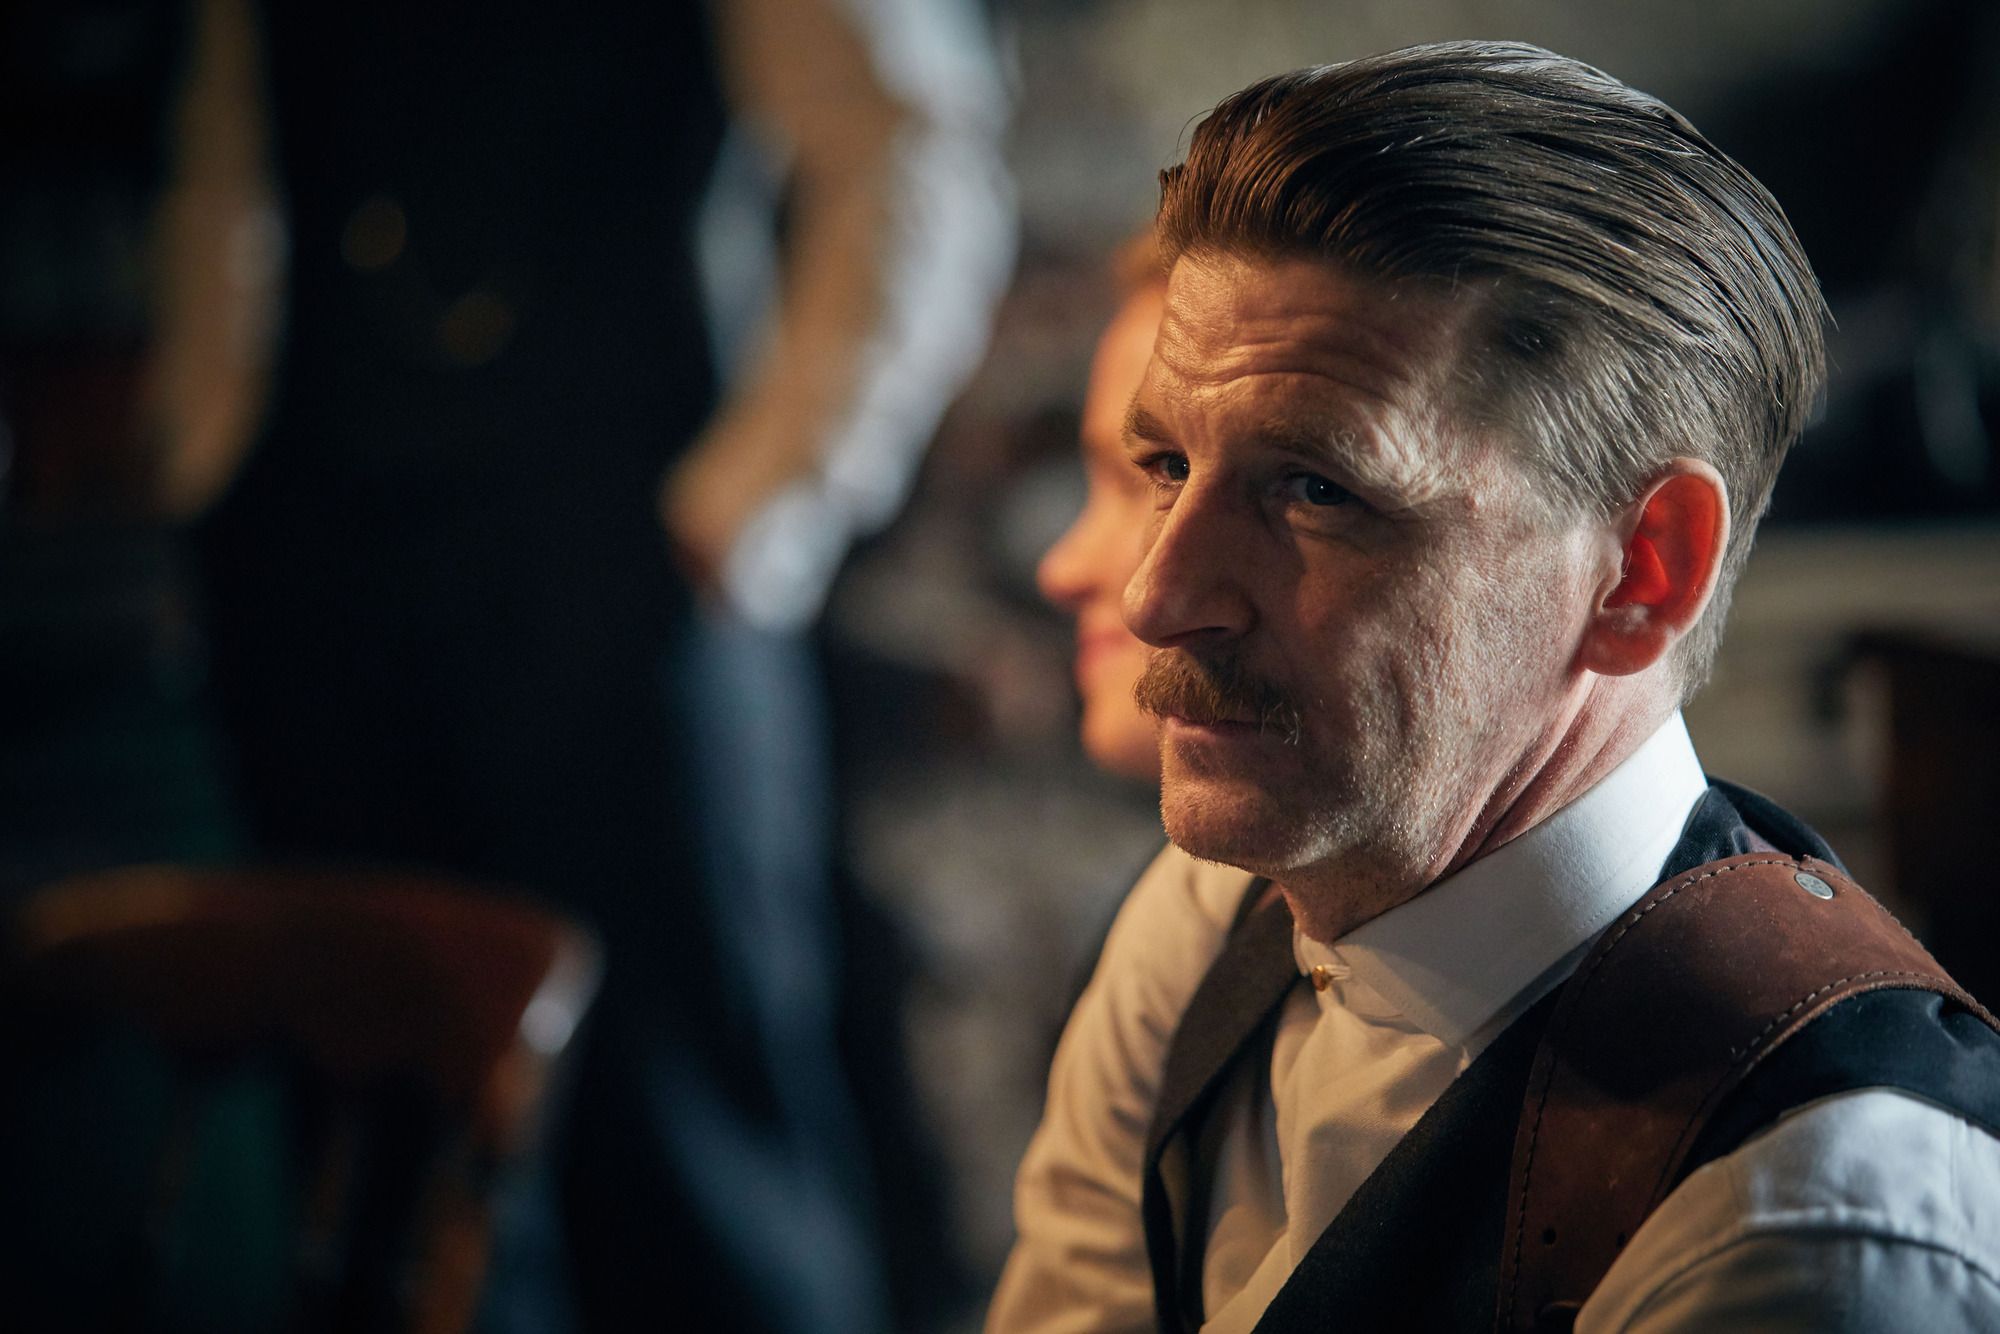 Peaky Blinders faces more complaints over mumbling | The Sun